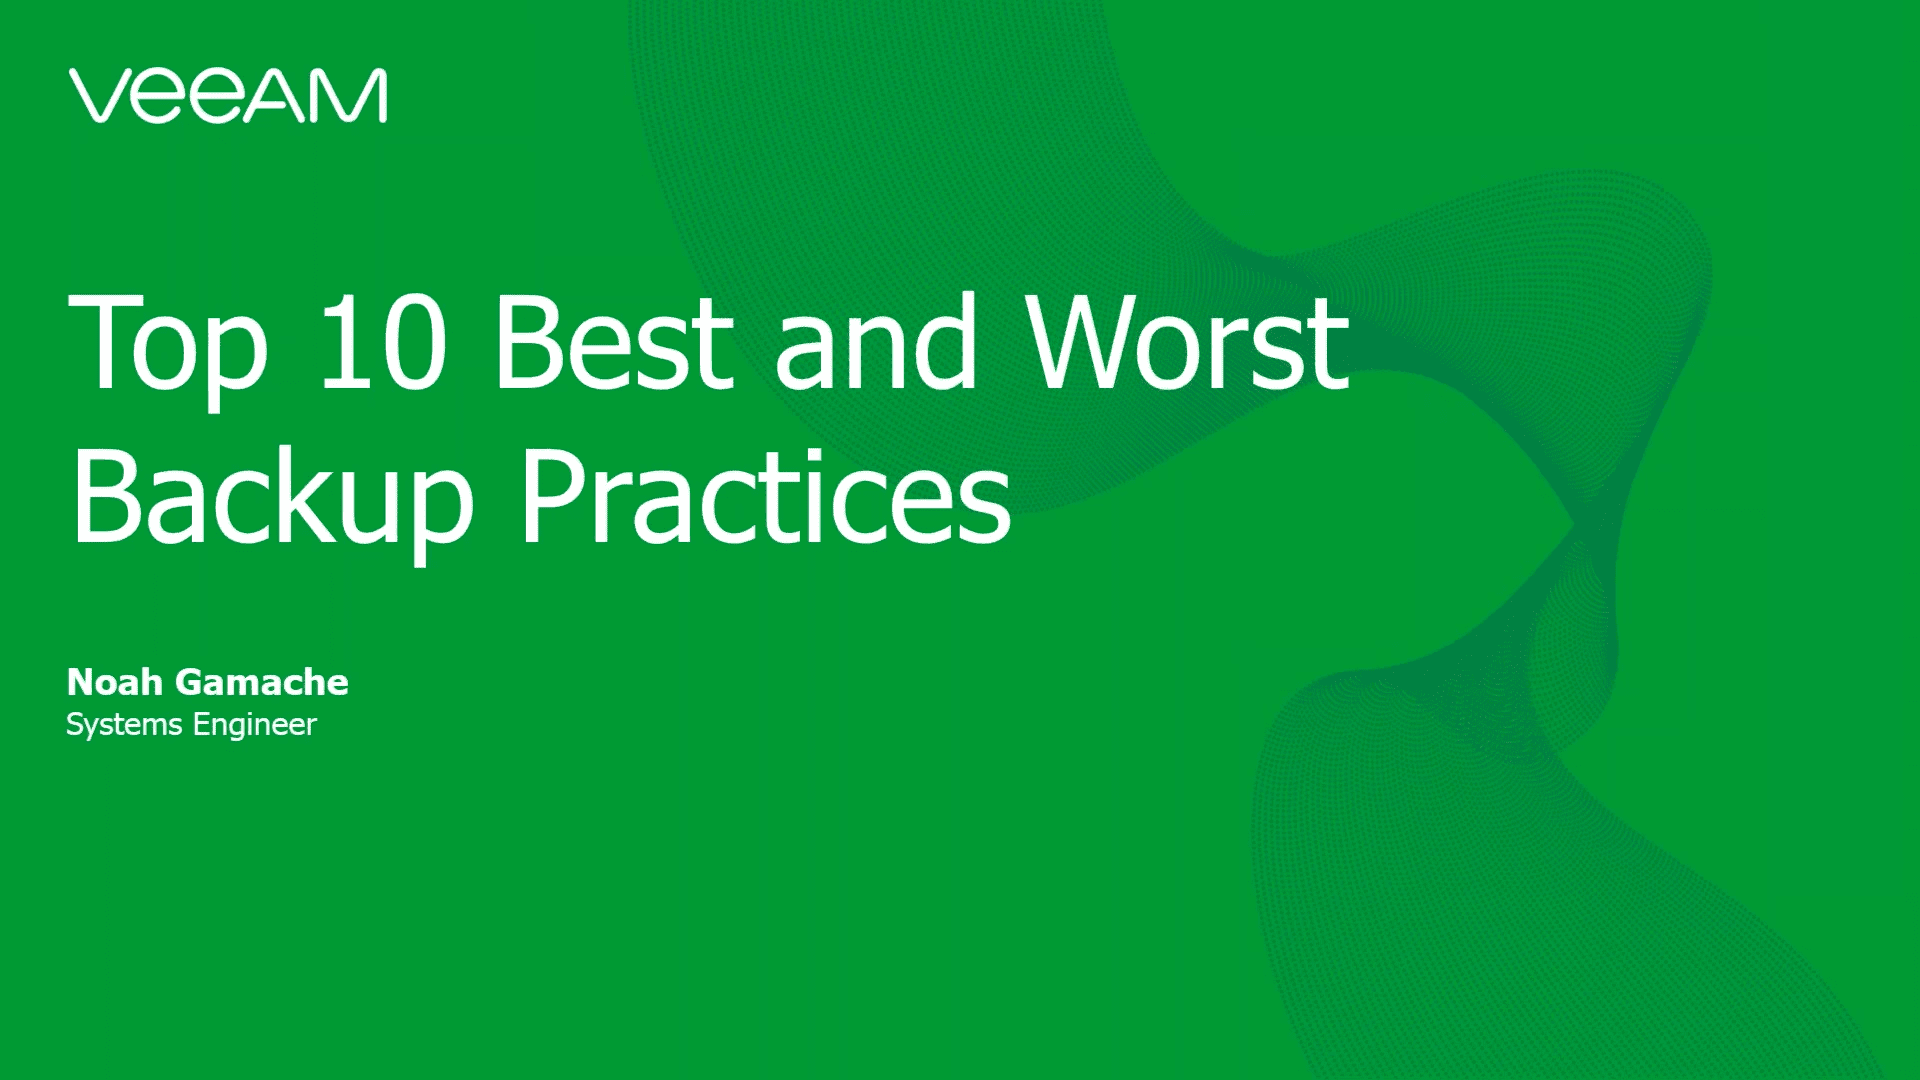 Best and worst backup practices